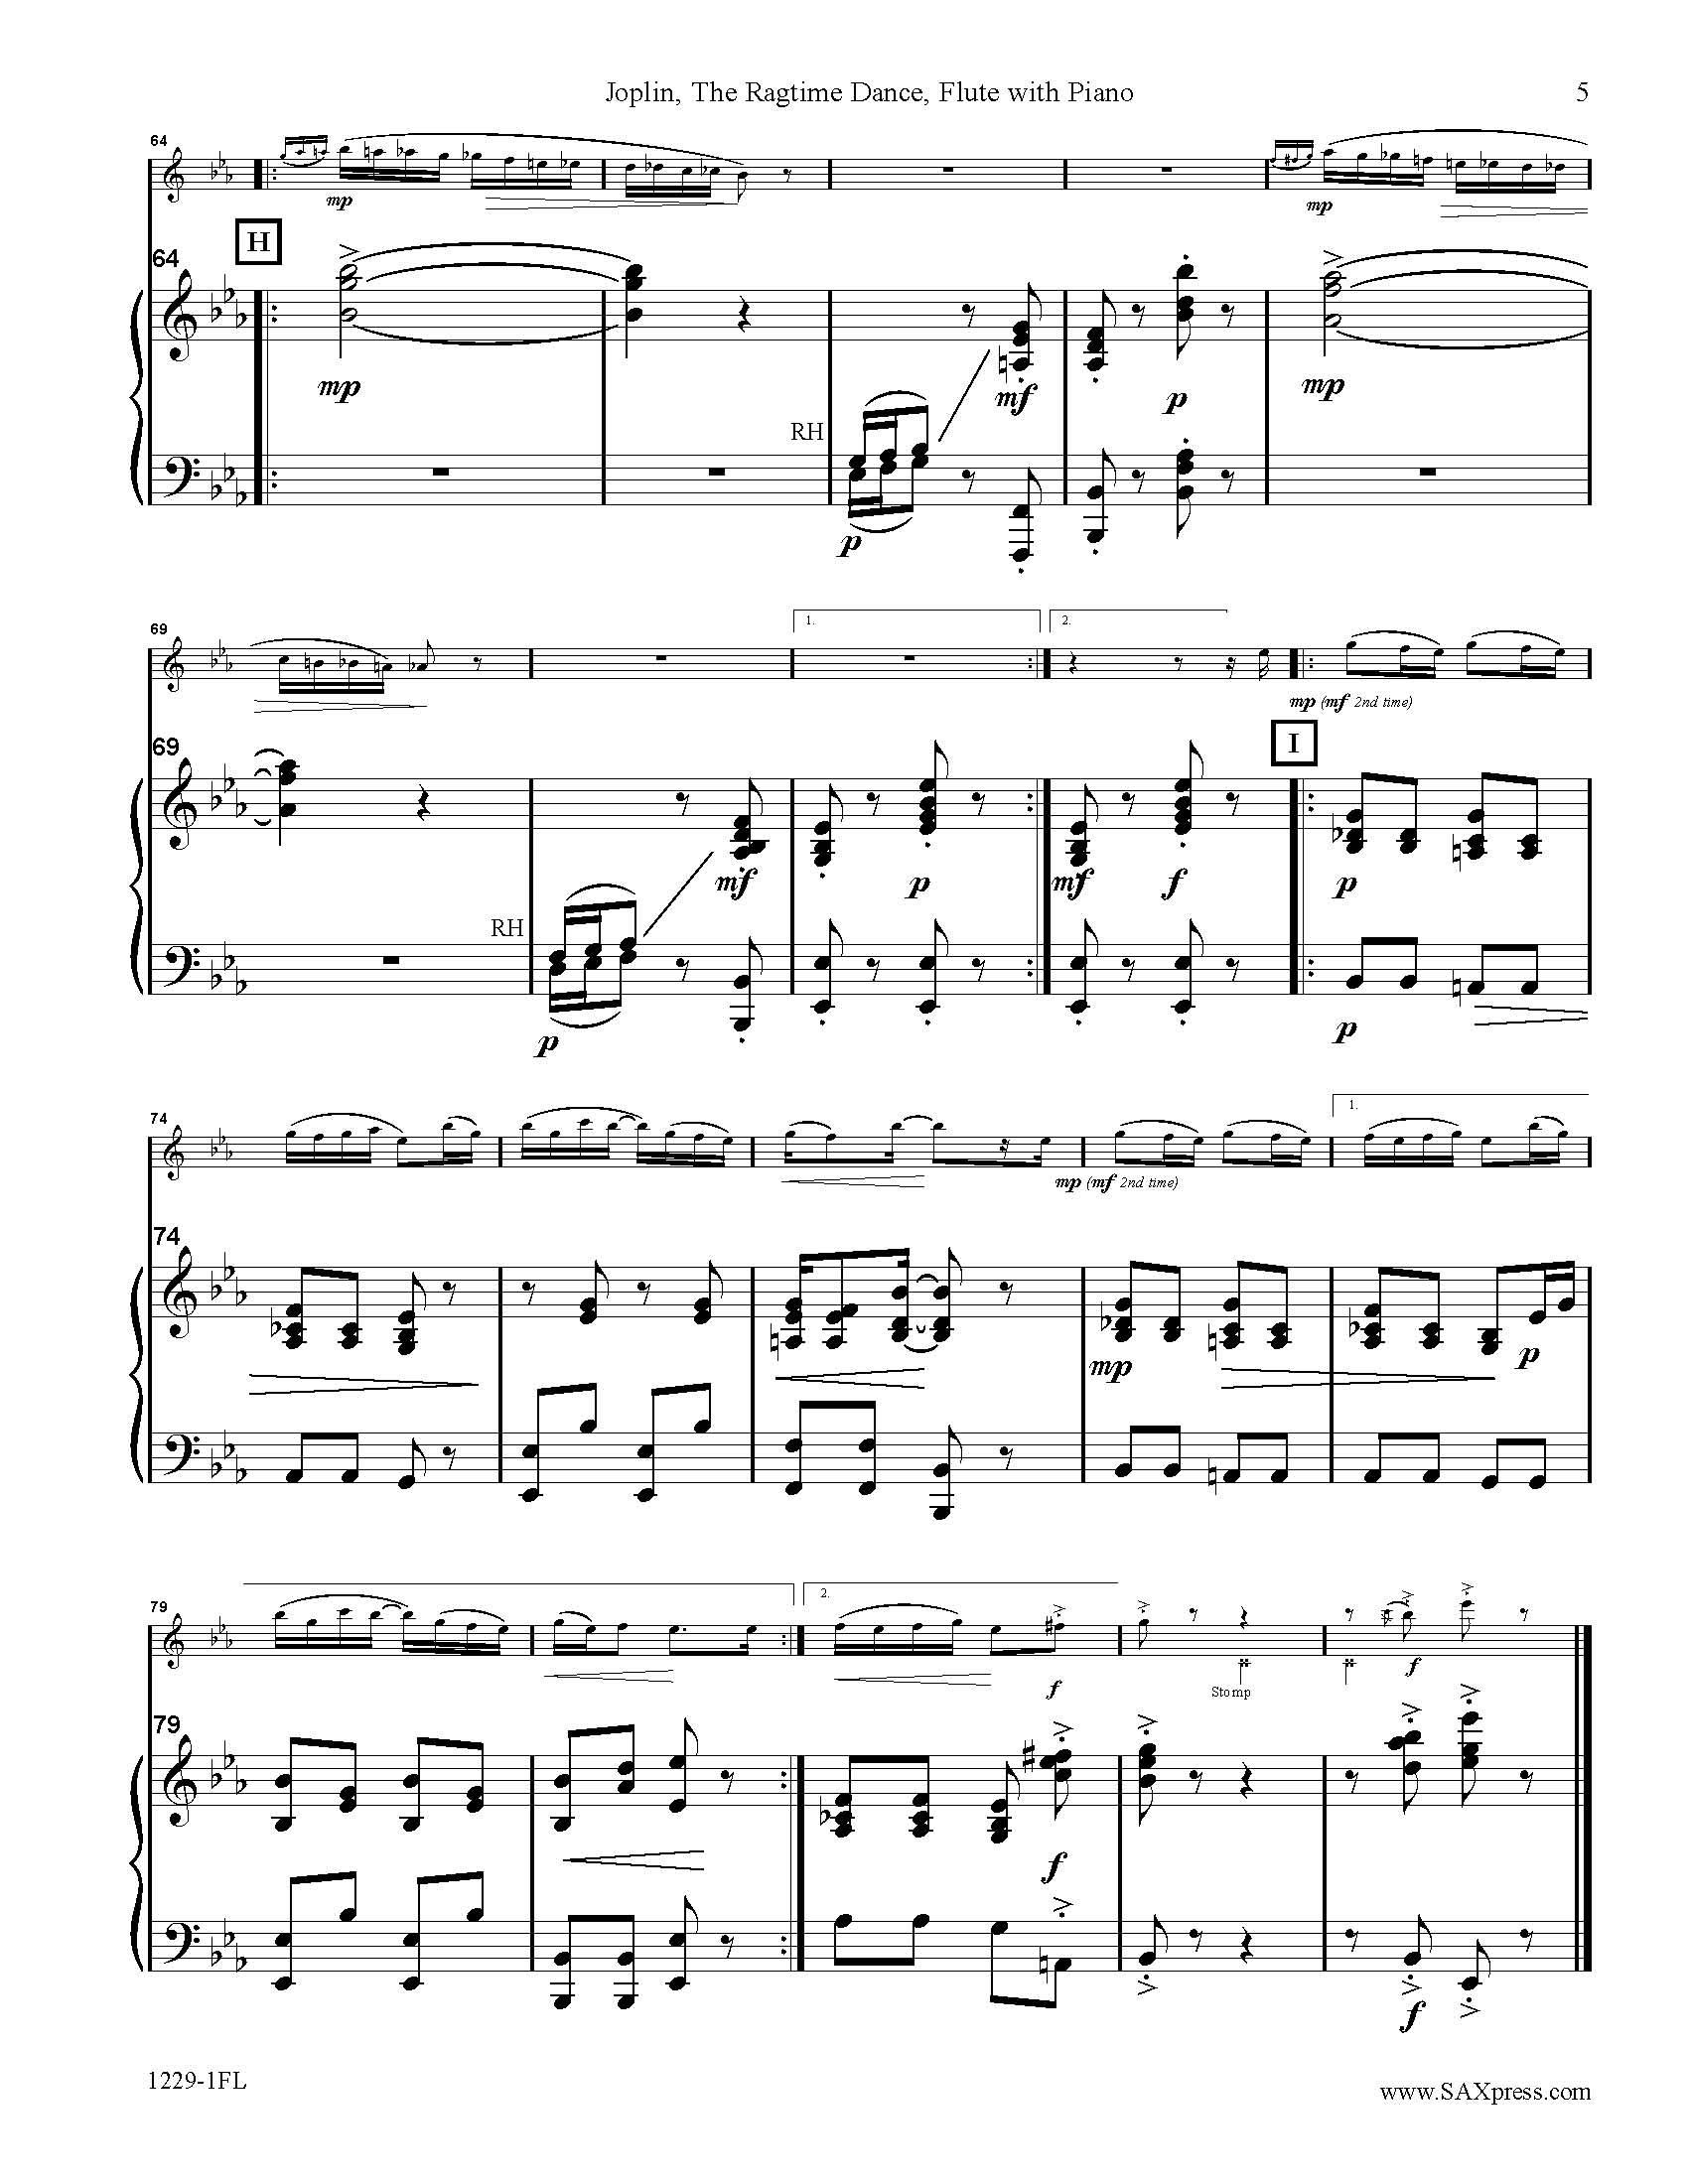 https://saxpress.com/wp-content/uploads/2021/02/The-Ragtime-Dance-Flute-SOLO-with-piano-00-Piano-Score_Page_07.jpg